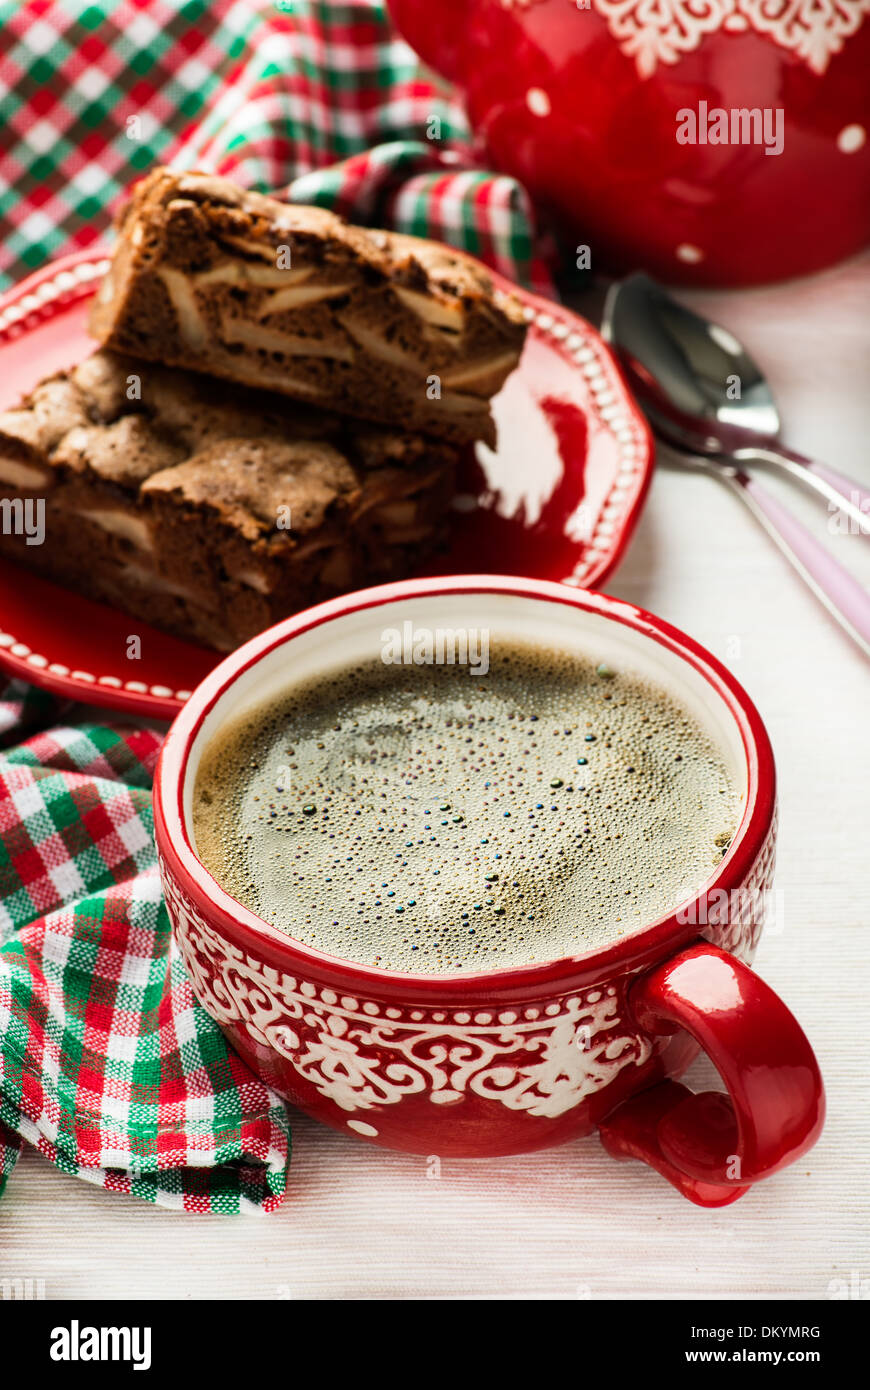 Cup of coffee and chocolate pie, selective focus Stock Photo